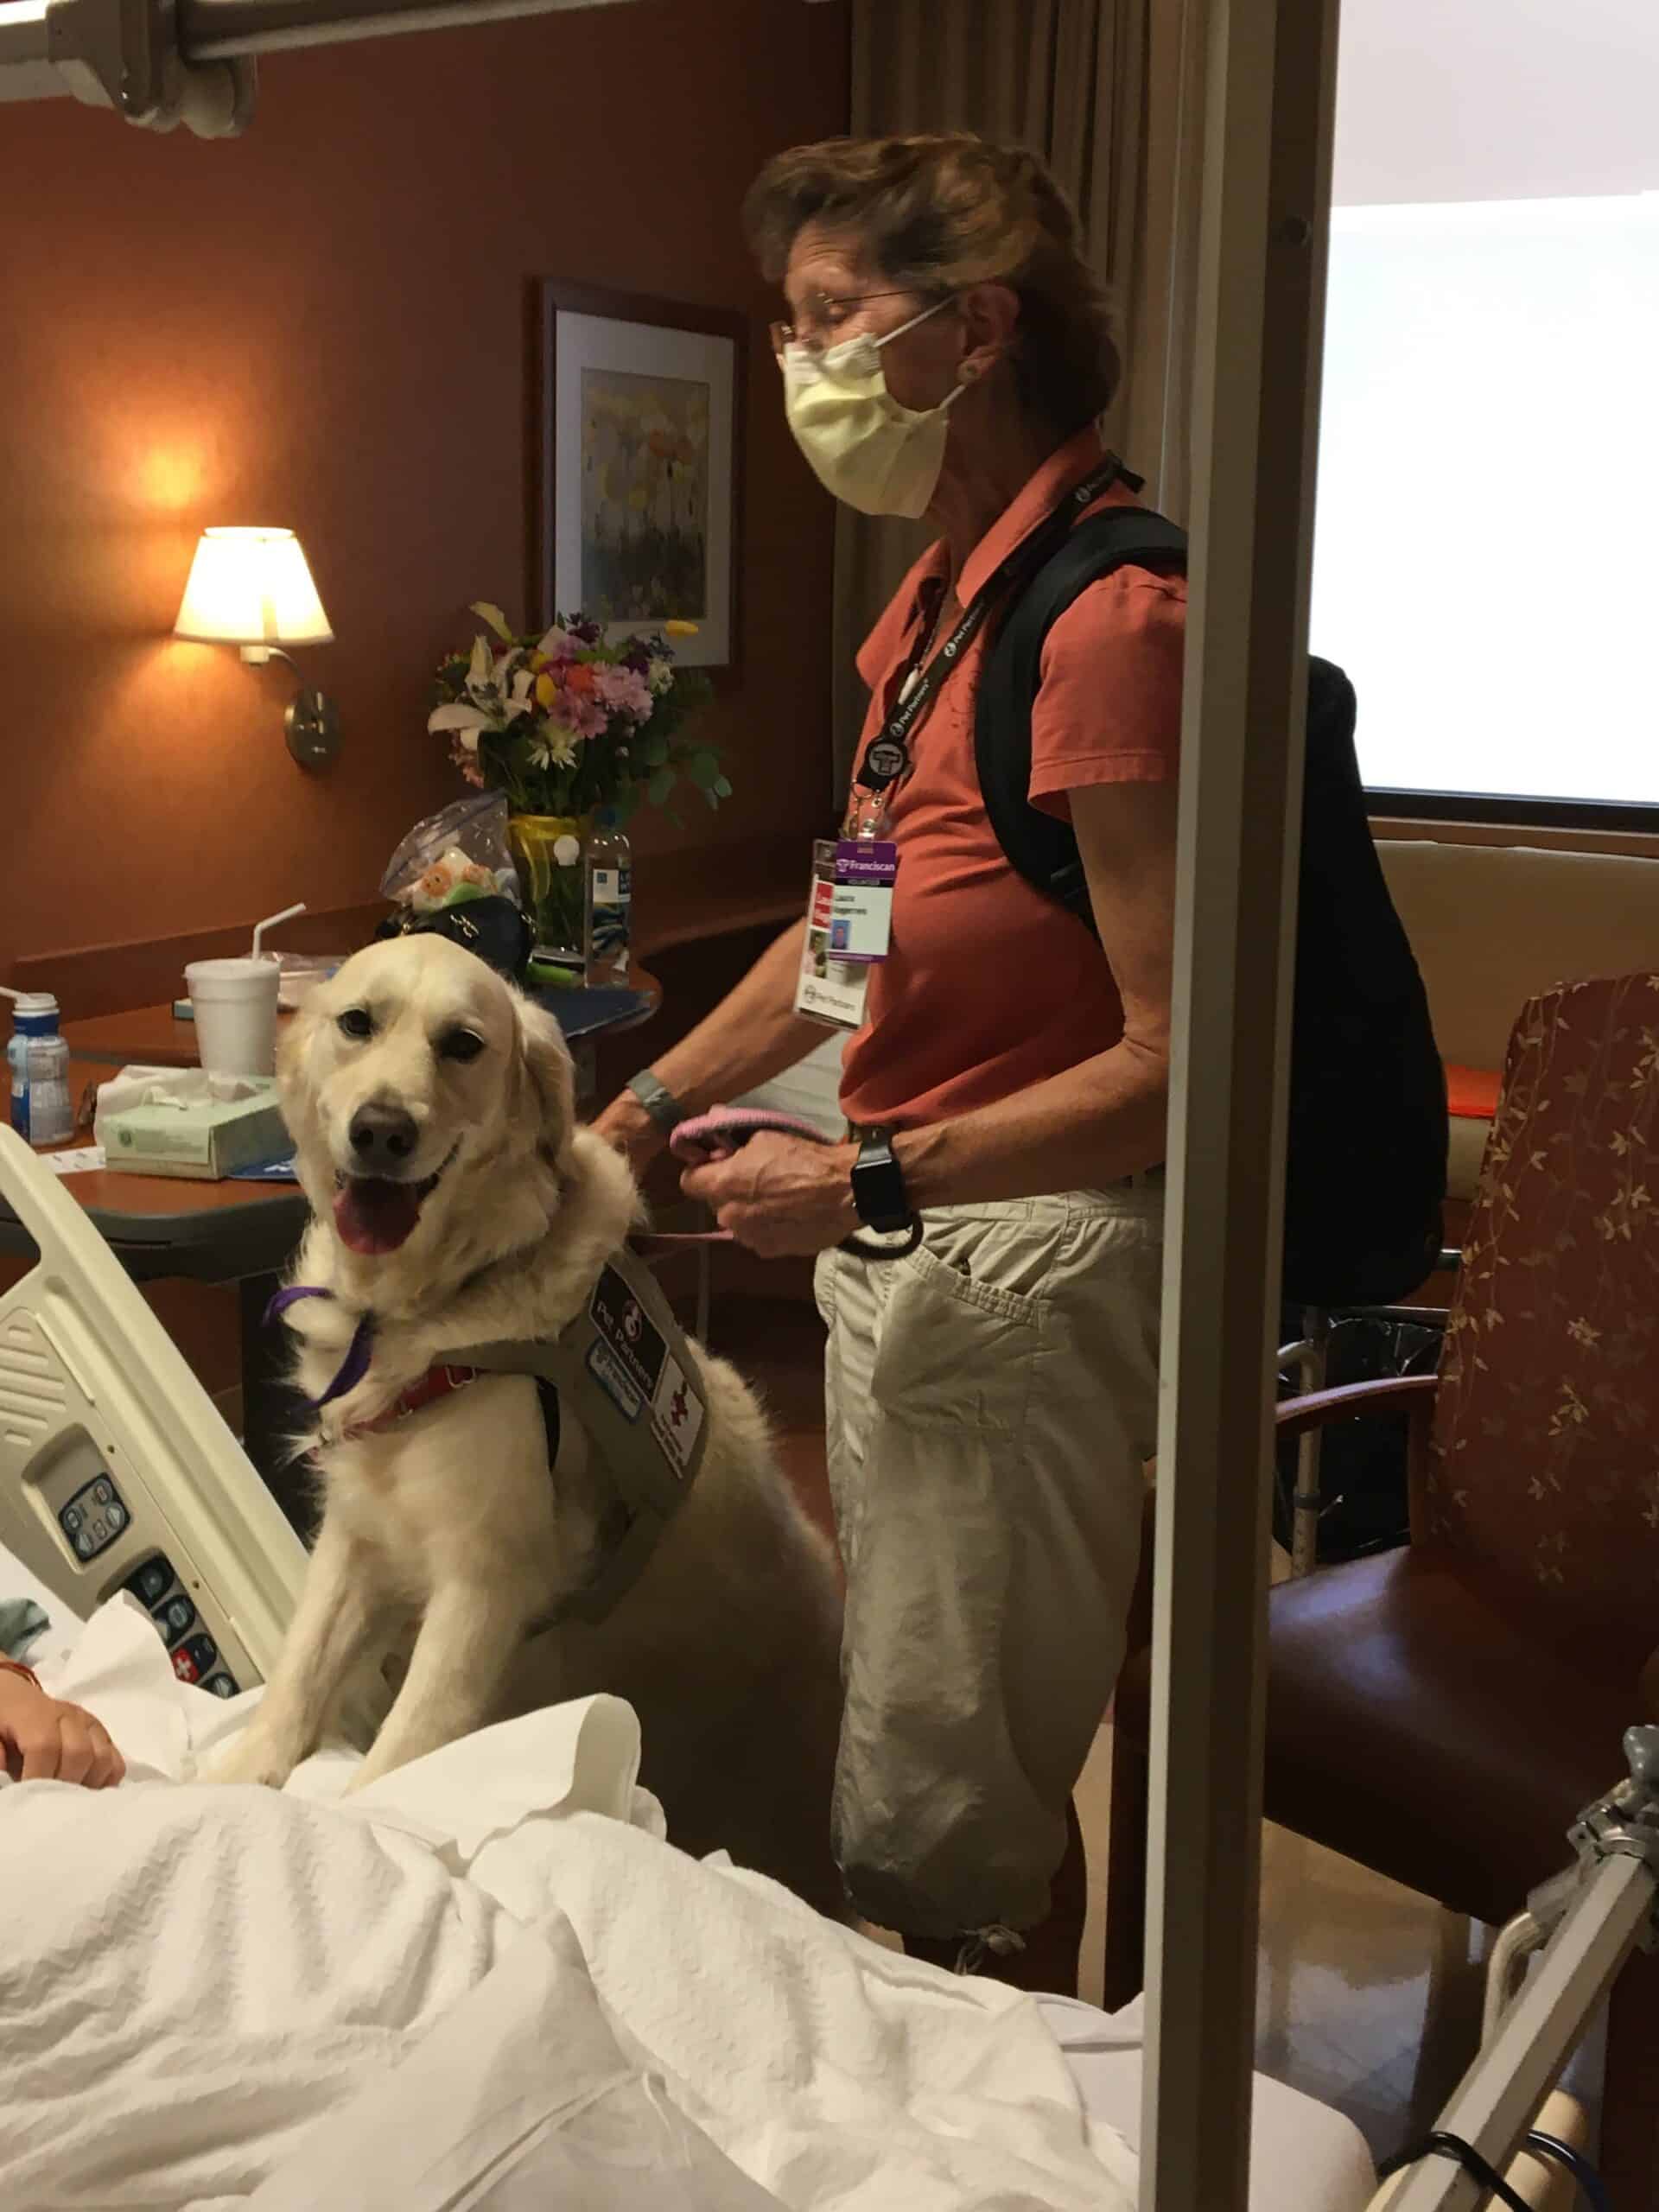 A therapy dog team visit with a patient in a hospital.